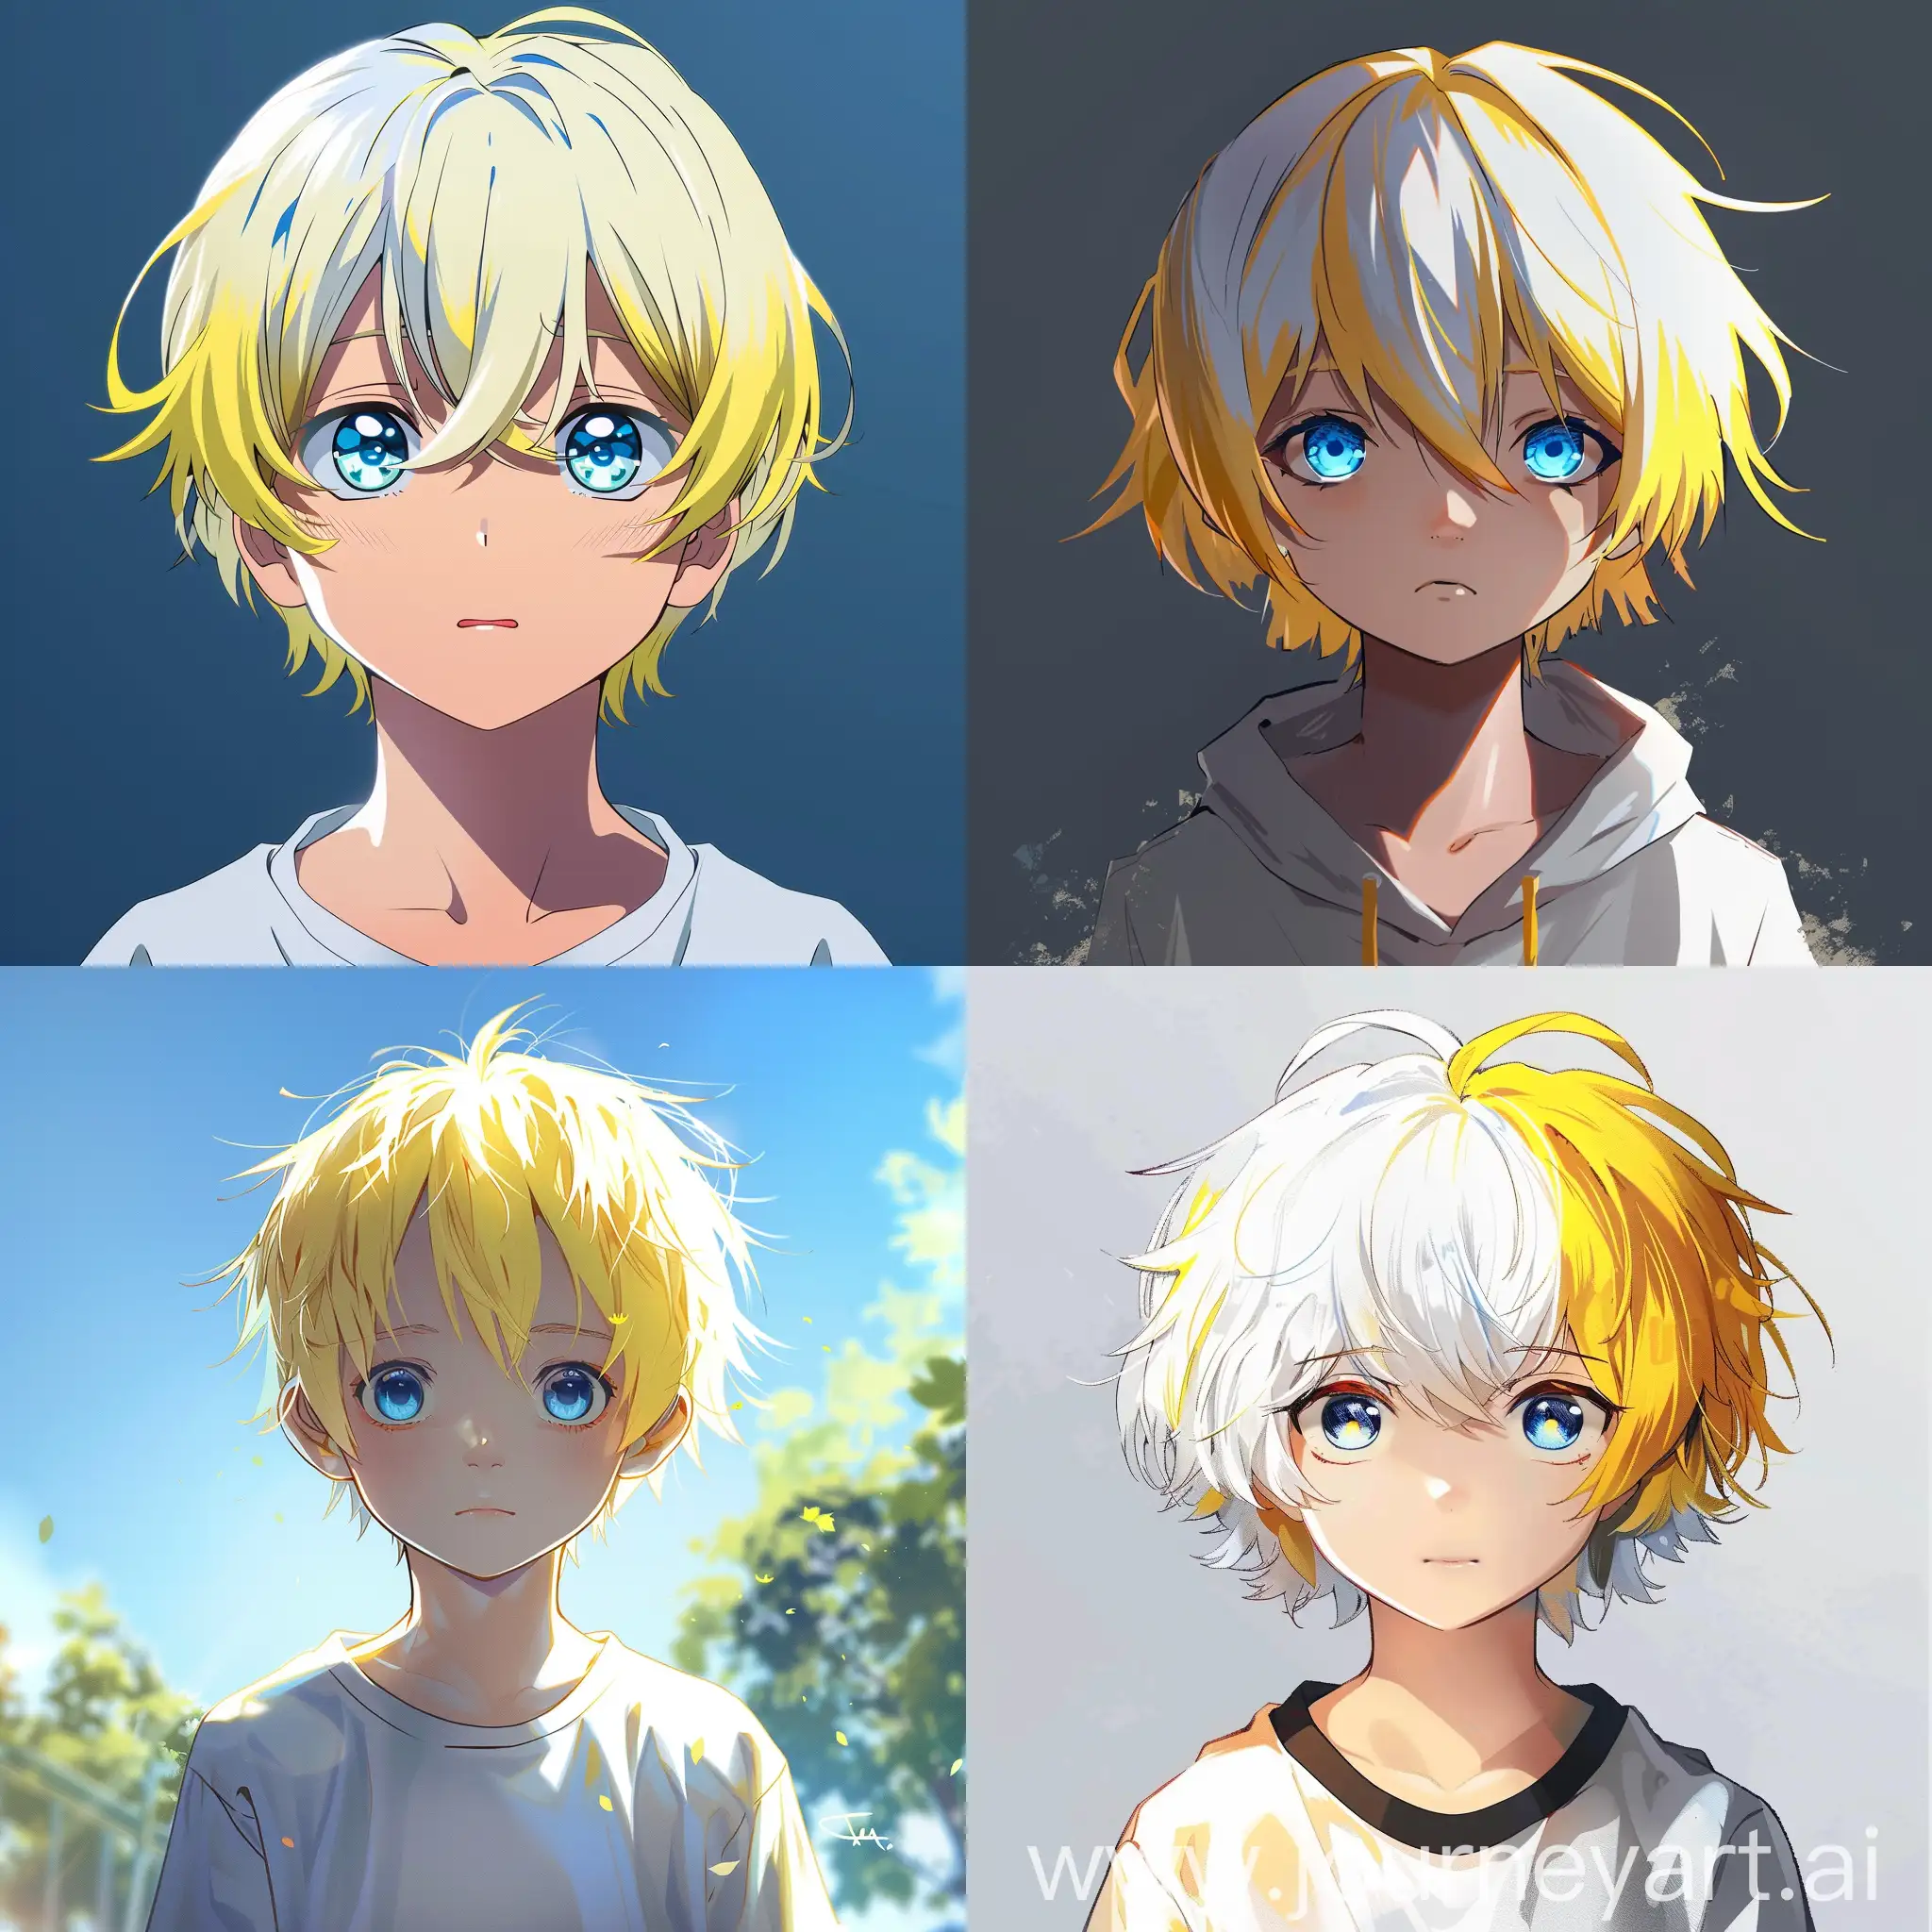 Anime-Portrait-of-Young-Boy-with-Short-YellowWhite-Hair-and-Blue-Eyes